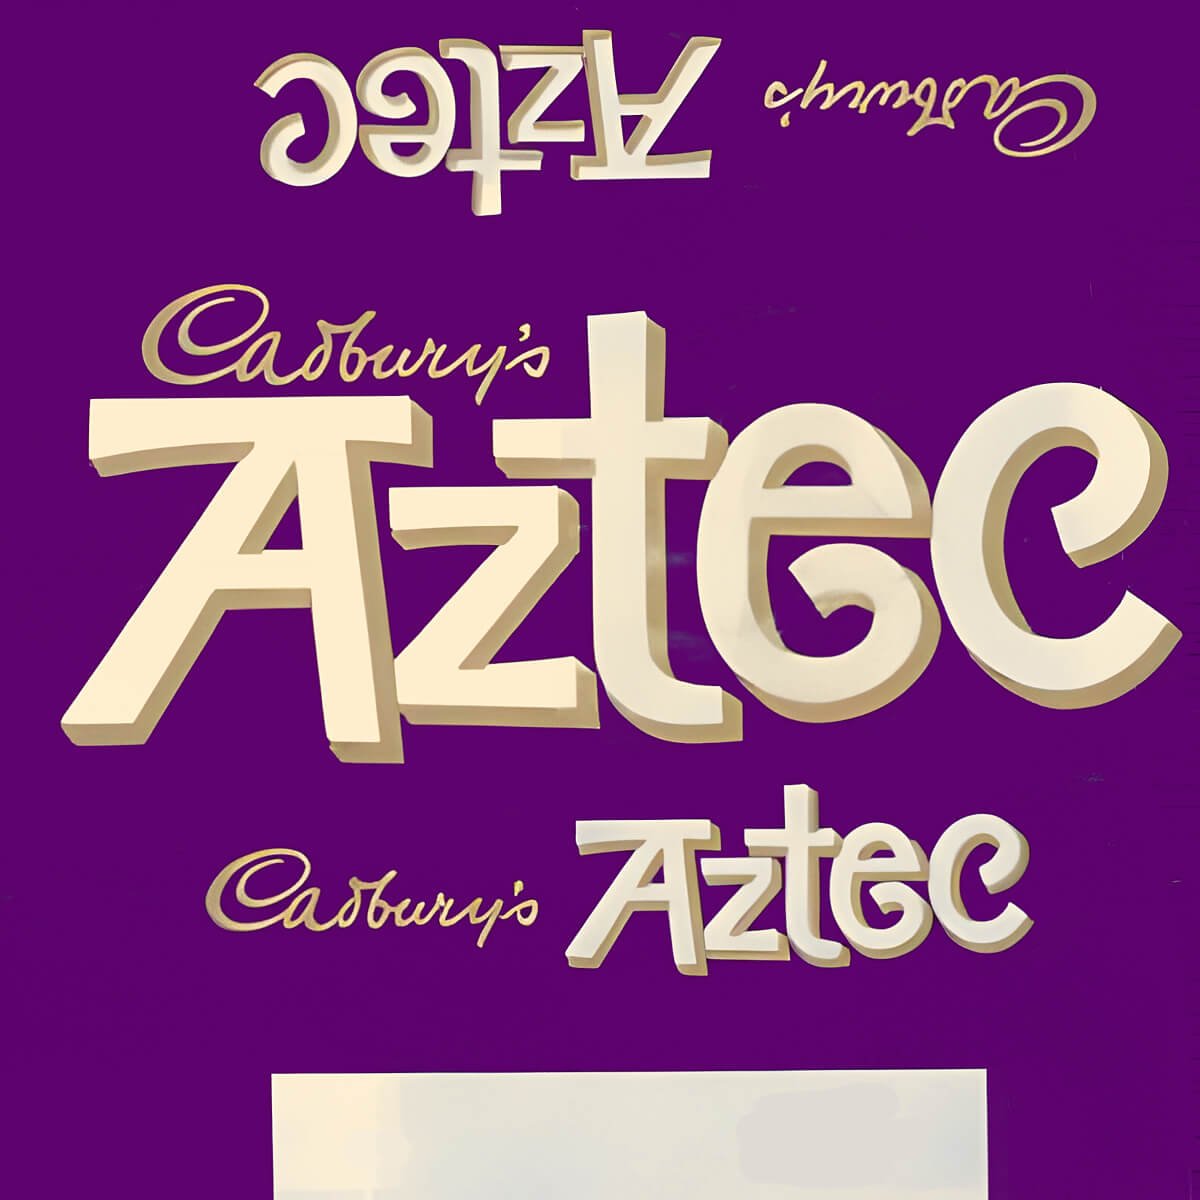 Cadbury's Aztec chocolate bar wrapper from the 1970s. Purple with white and gold text logo.